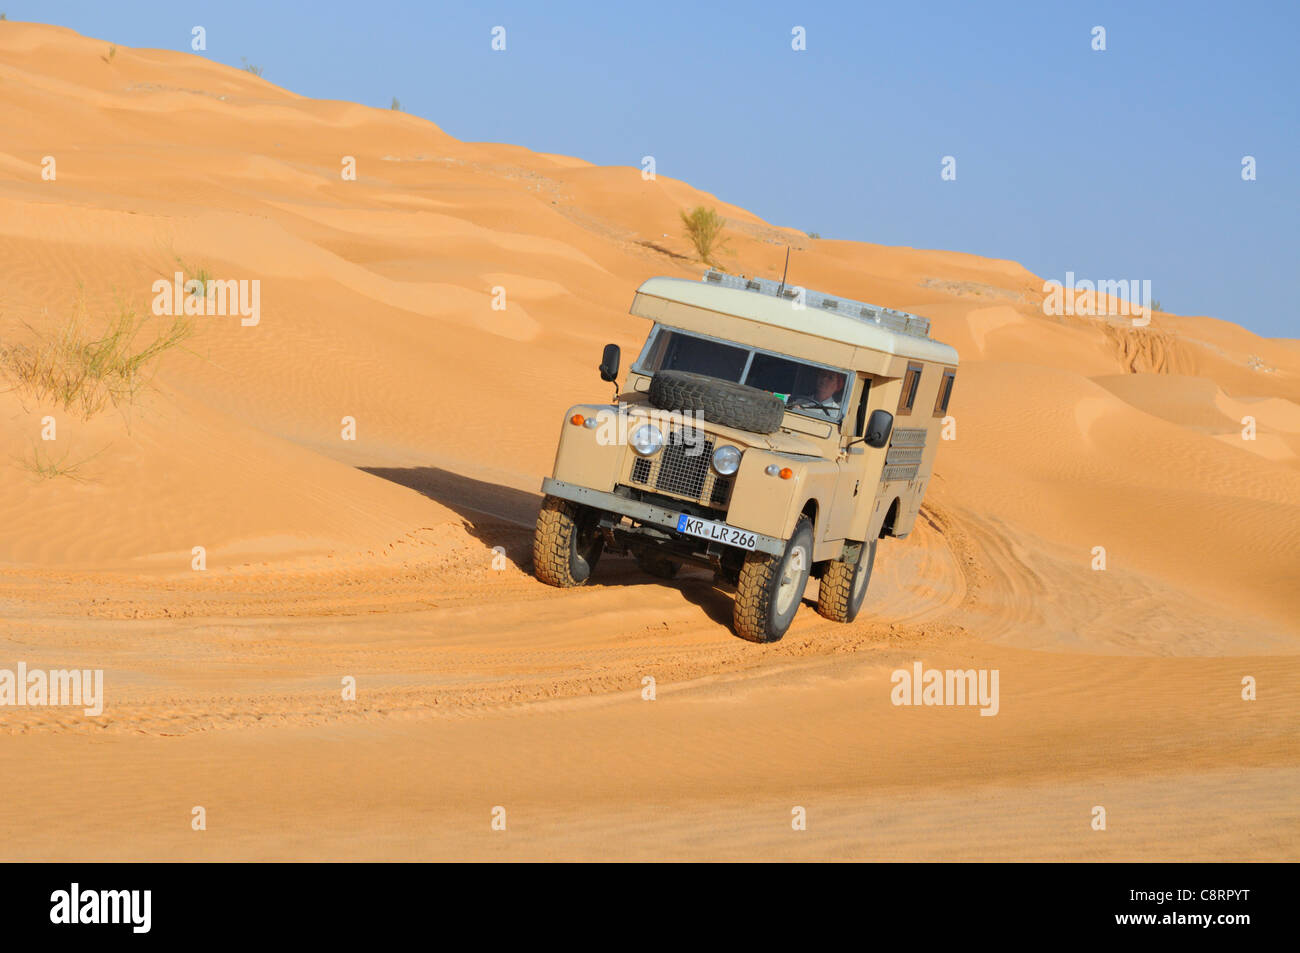 Africa, Tunisia, nr. Tembaine. Desert traveller driving an ex-army 1966 Land Rover Series 2a Ambulance through a sandfield ... Stock Photo